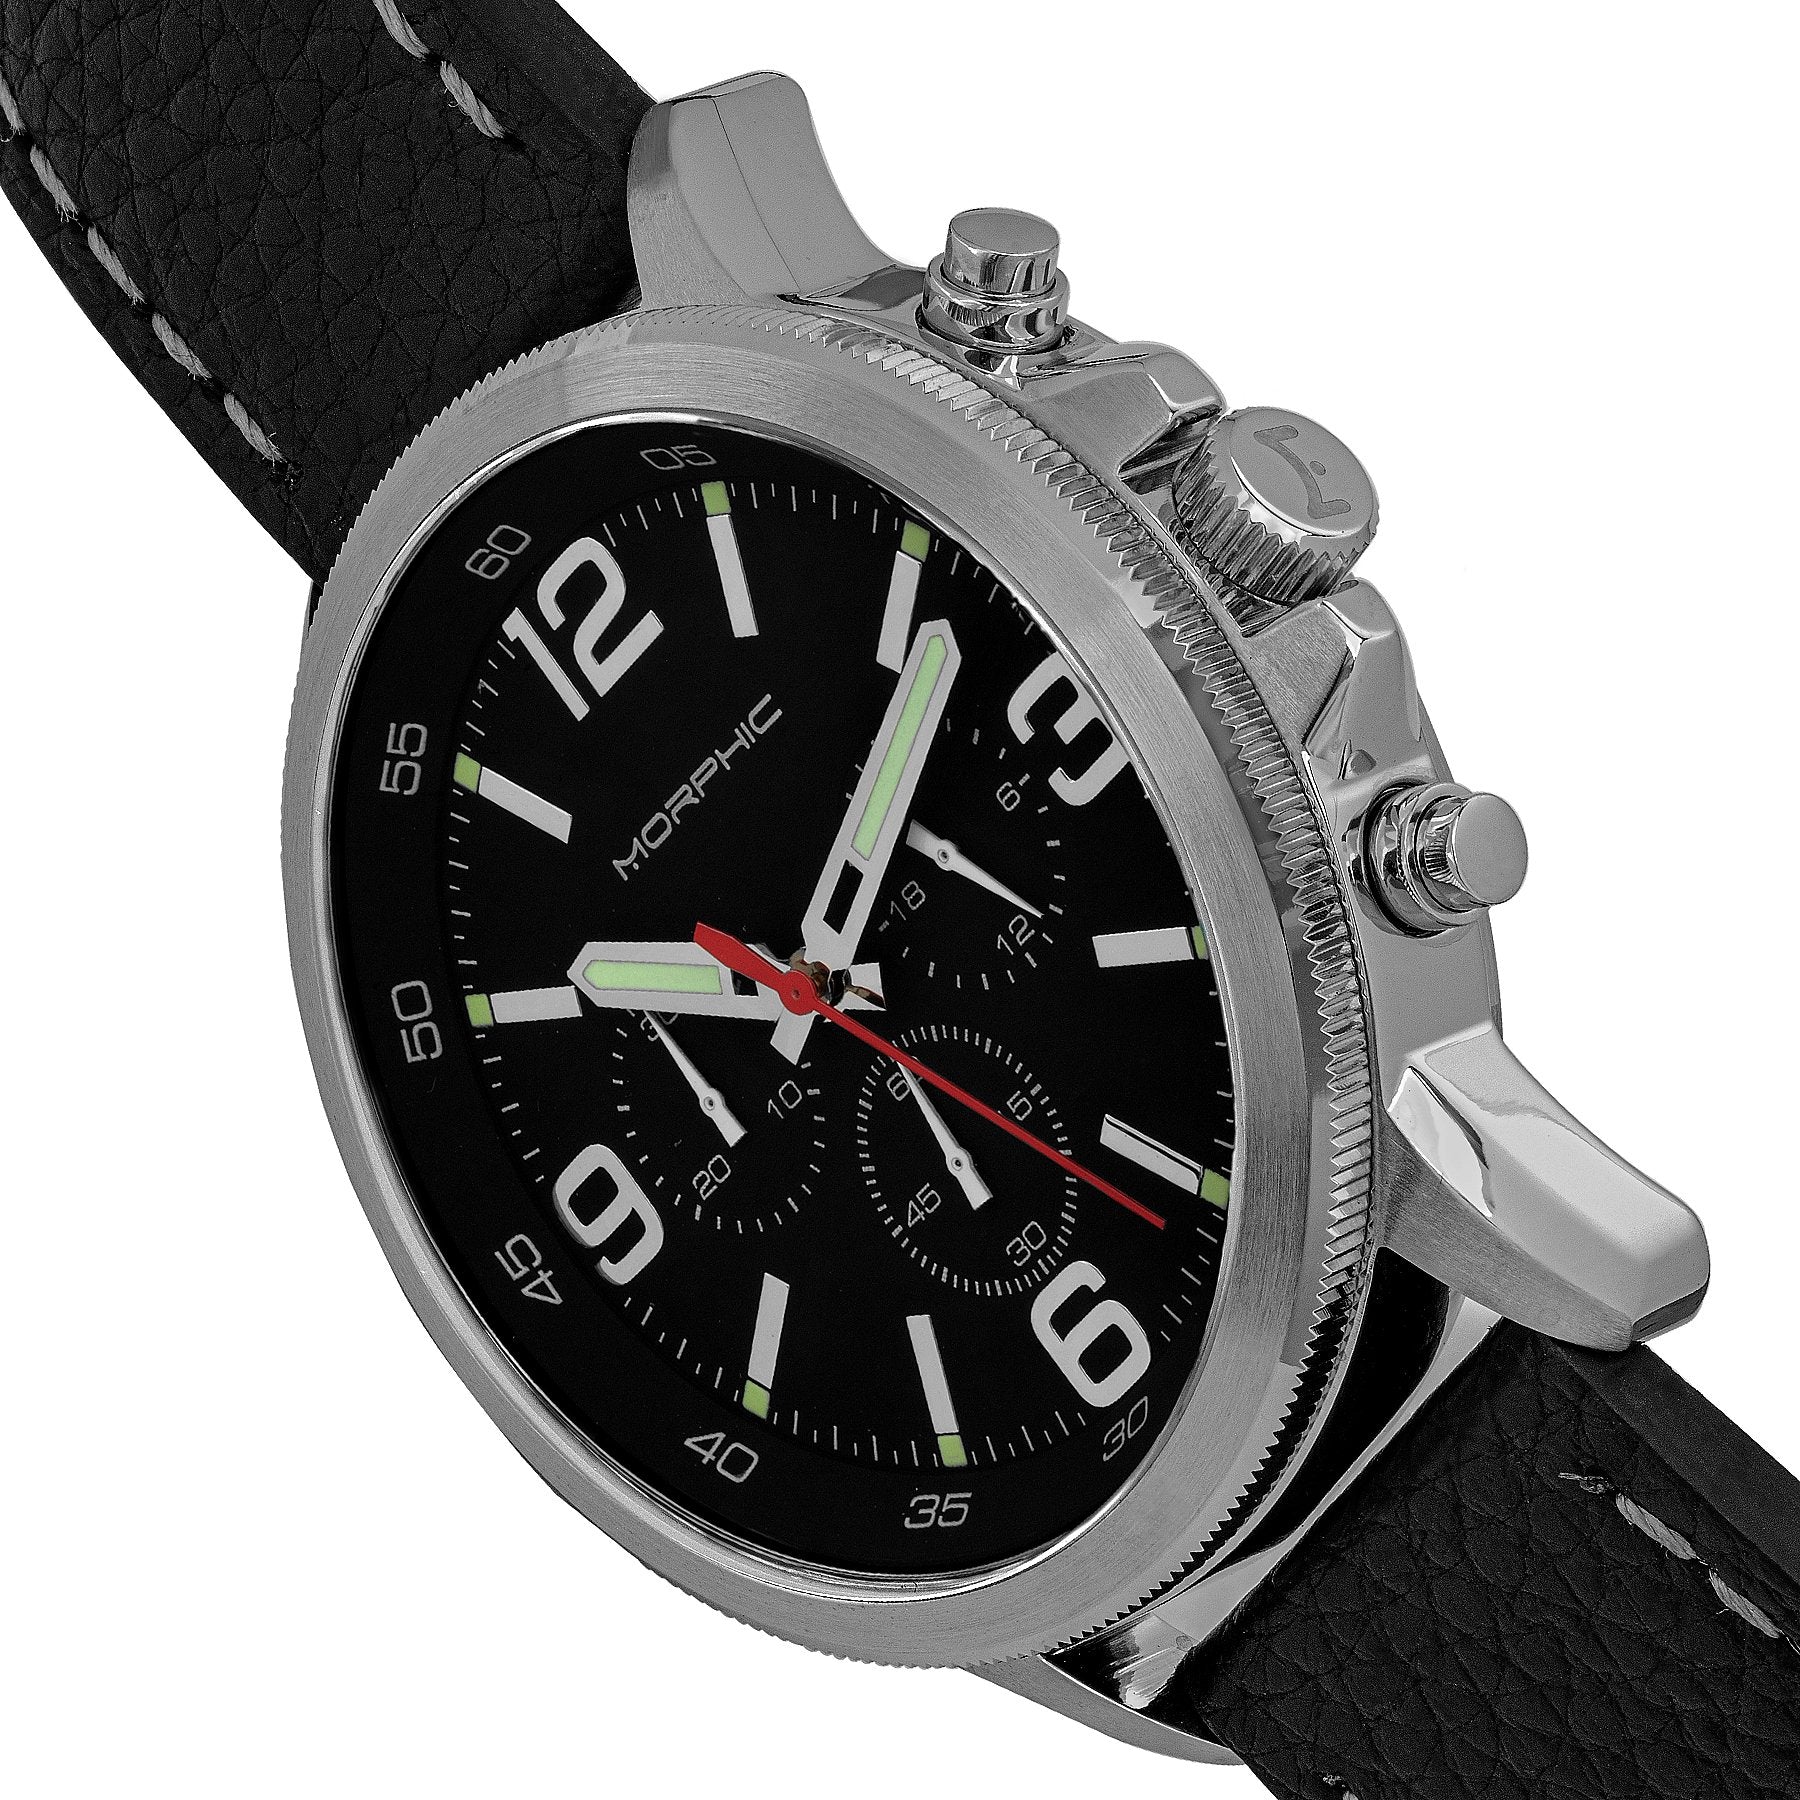 Morphic M86 Series Chronograph Leather-Band Watch - Silver/Black - MPH8602